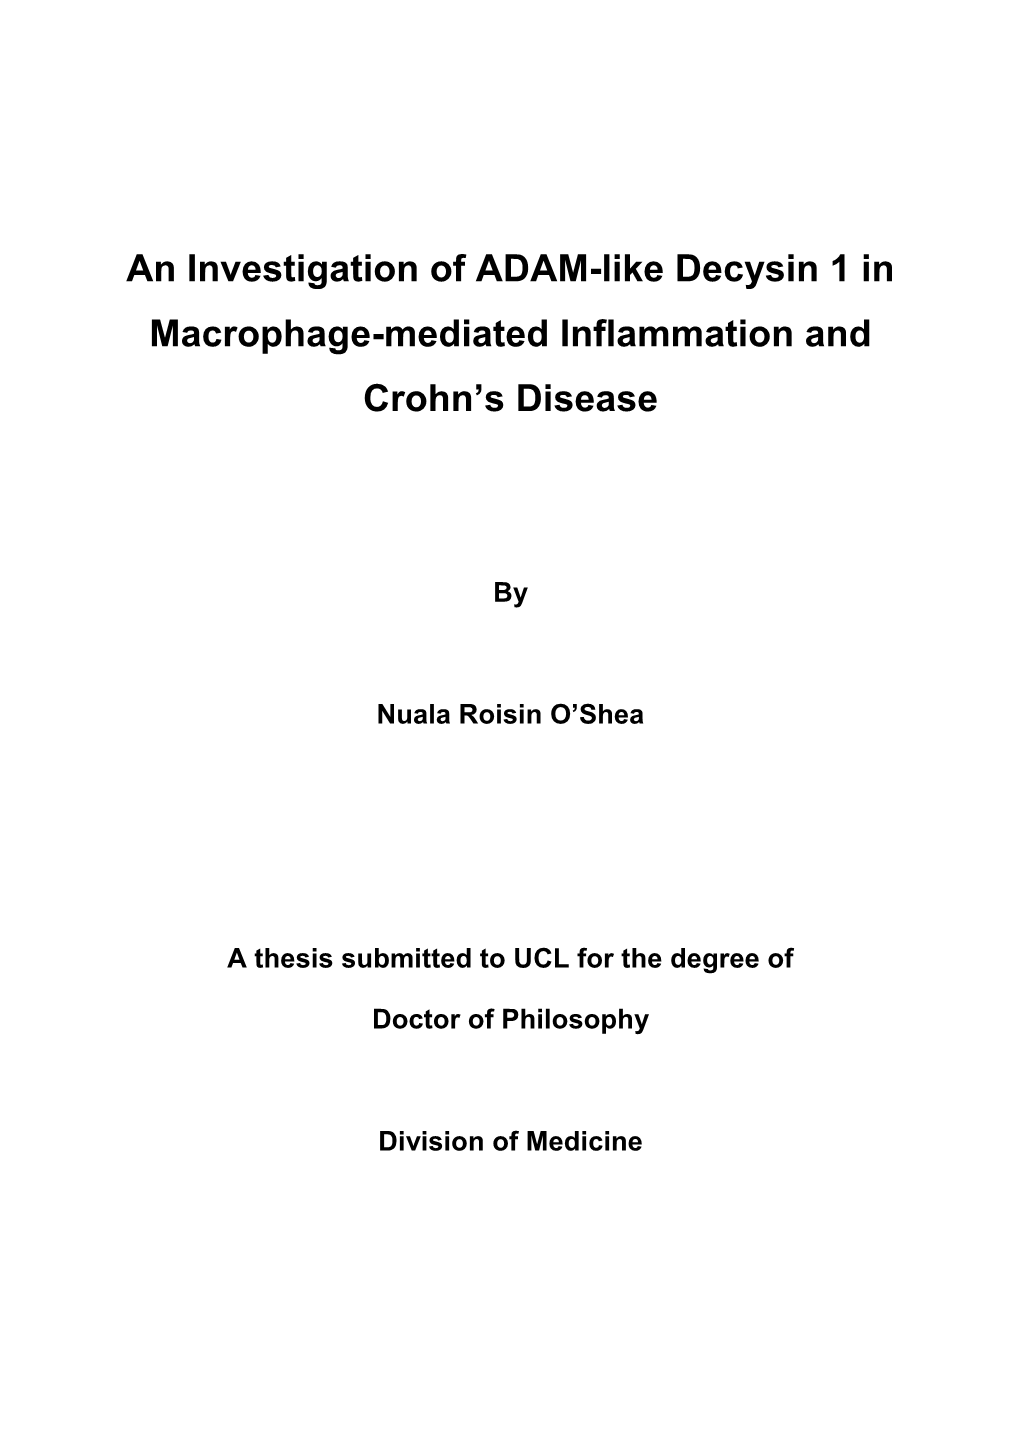 An Investigation of ADAM-Like Decysin 1 in Macrophage-Mediated Inflammation and Crohn’S Disease